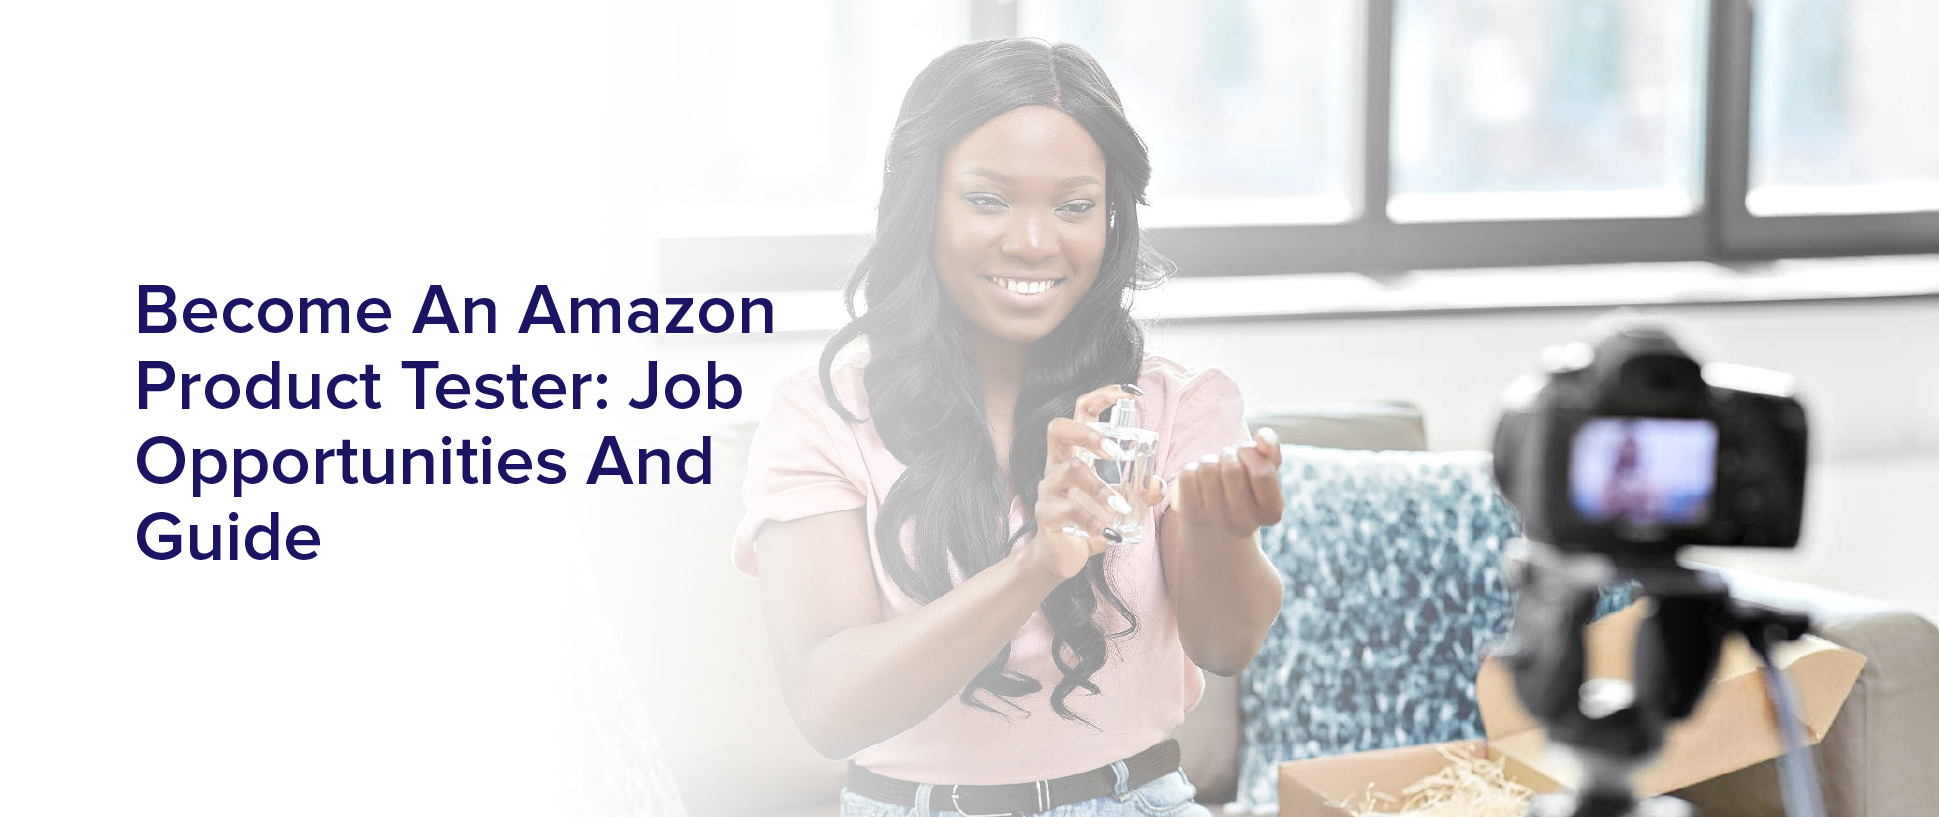 Become An Amazon Product Tester